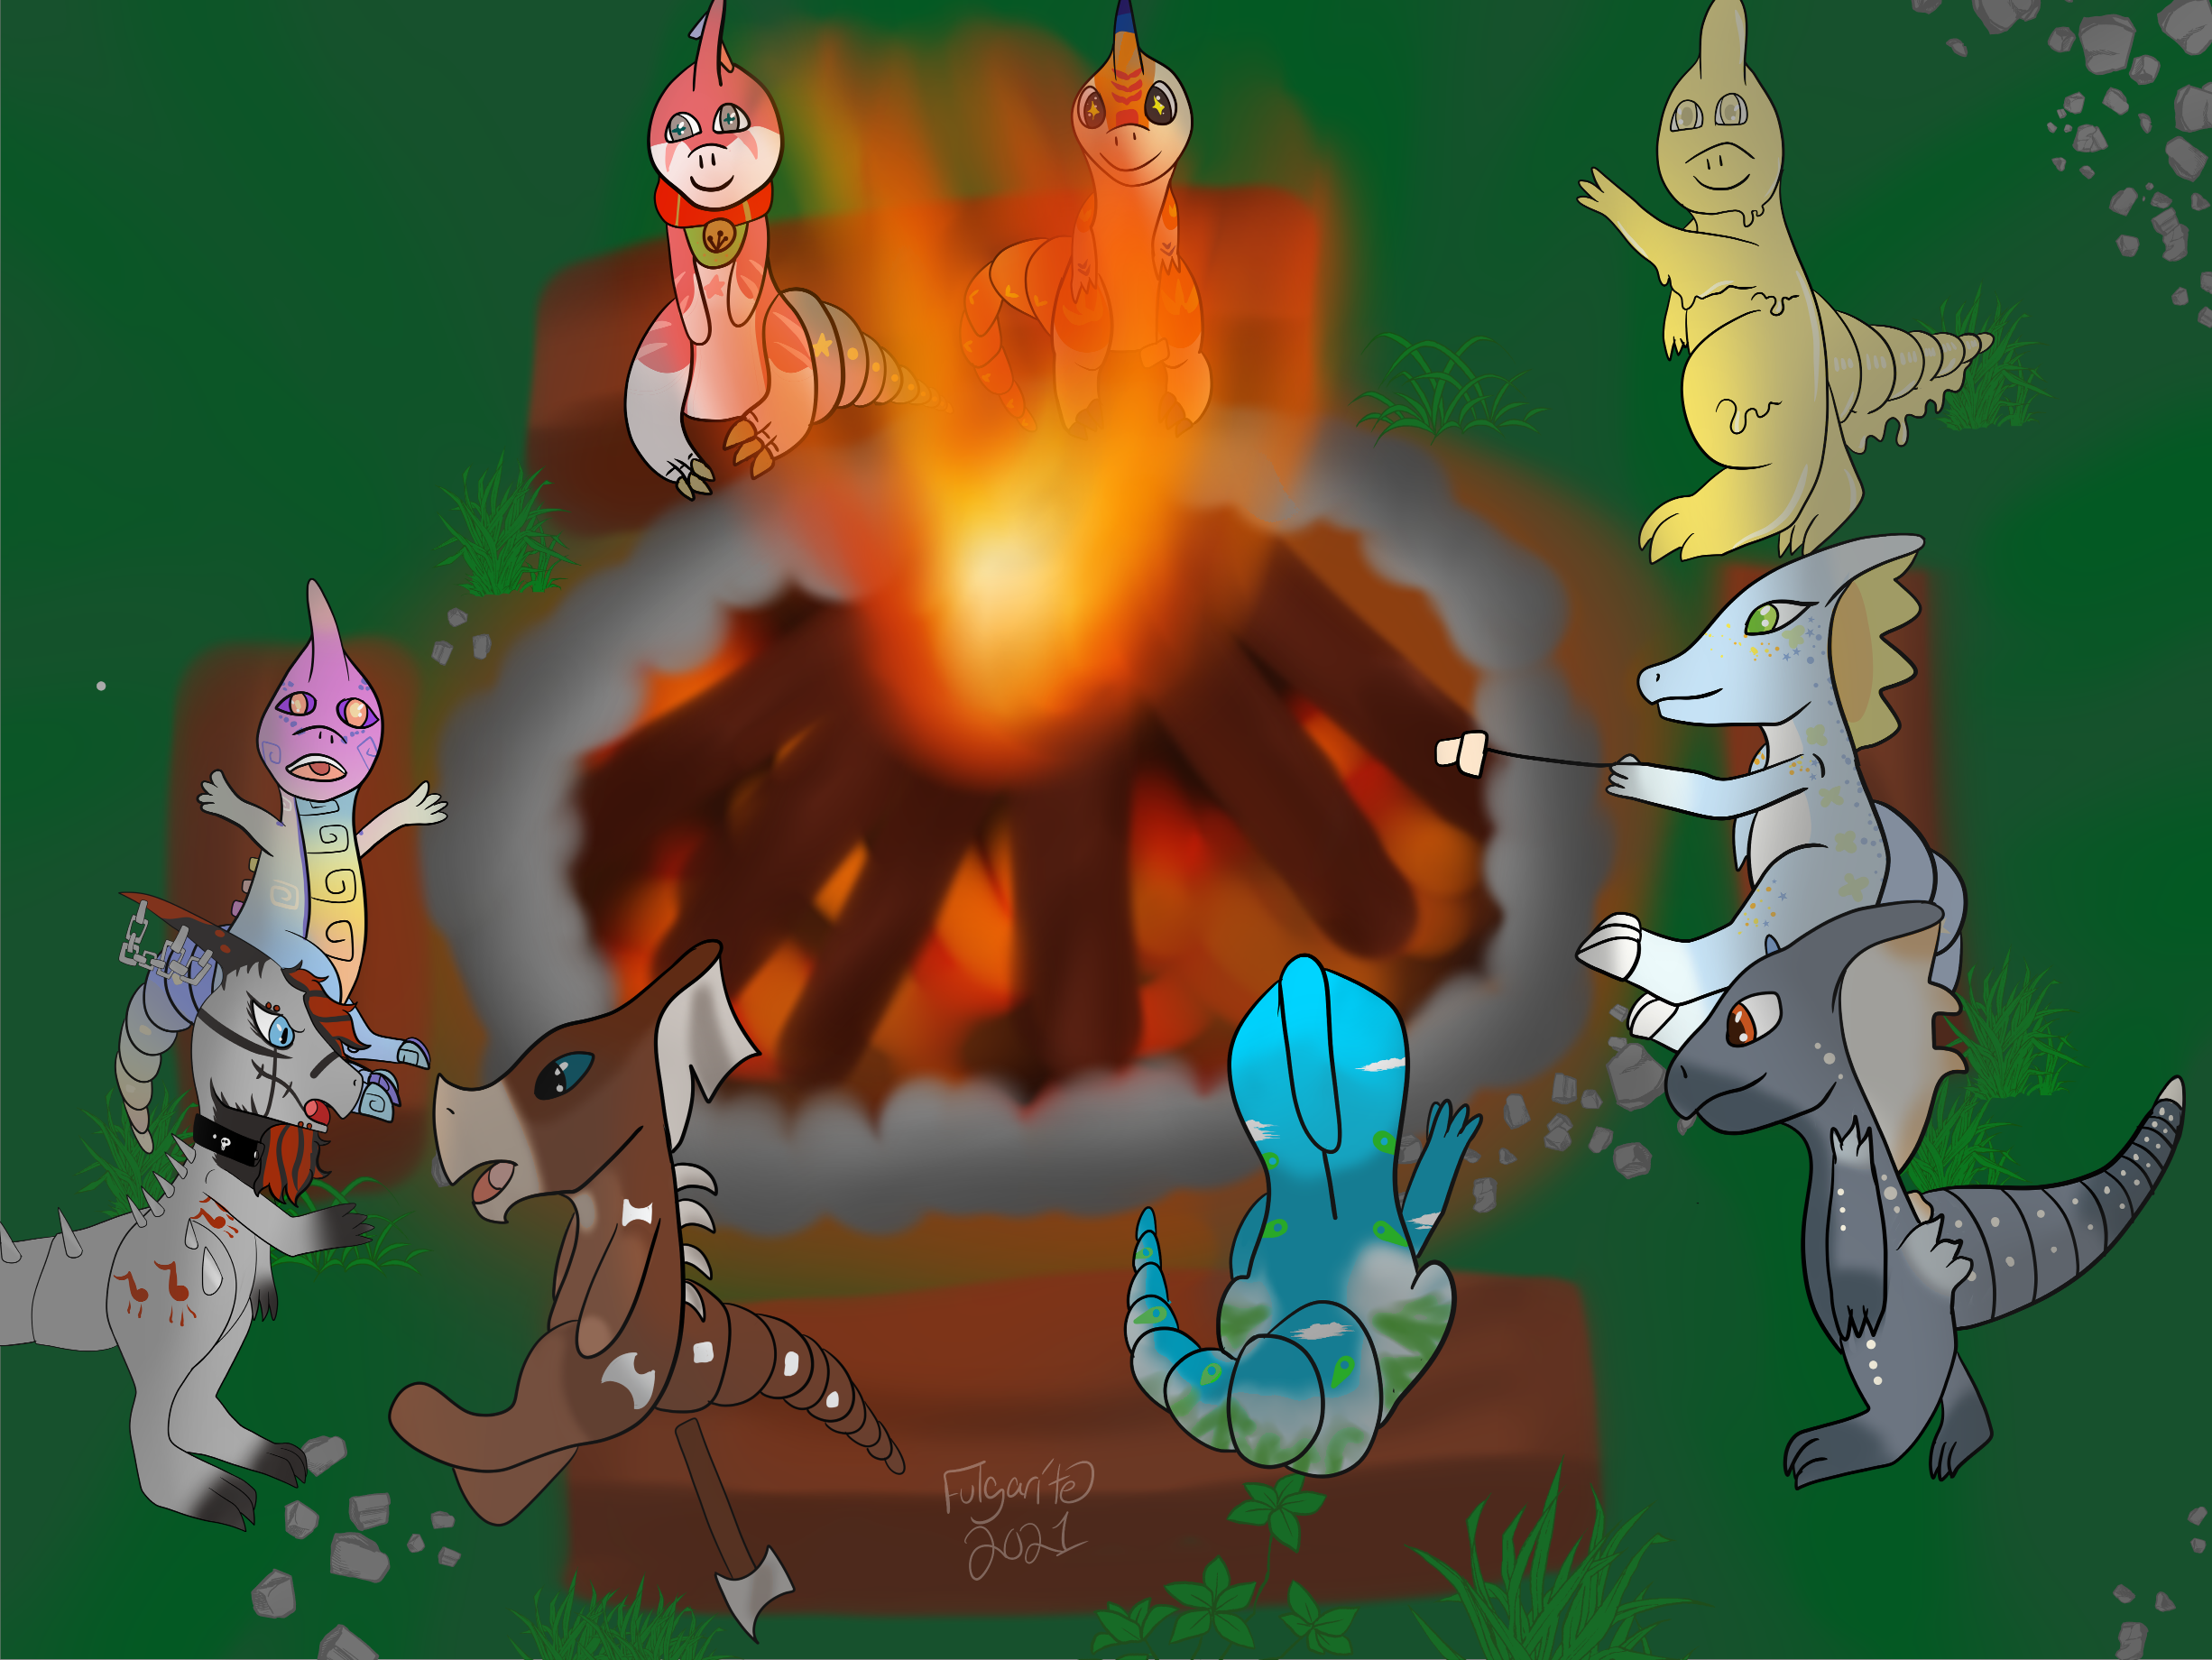 [Gift] Hanging out around a bonfire